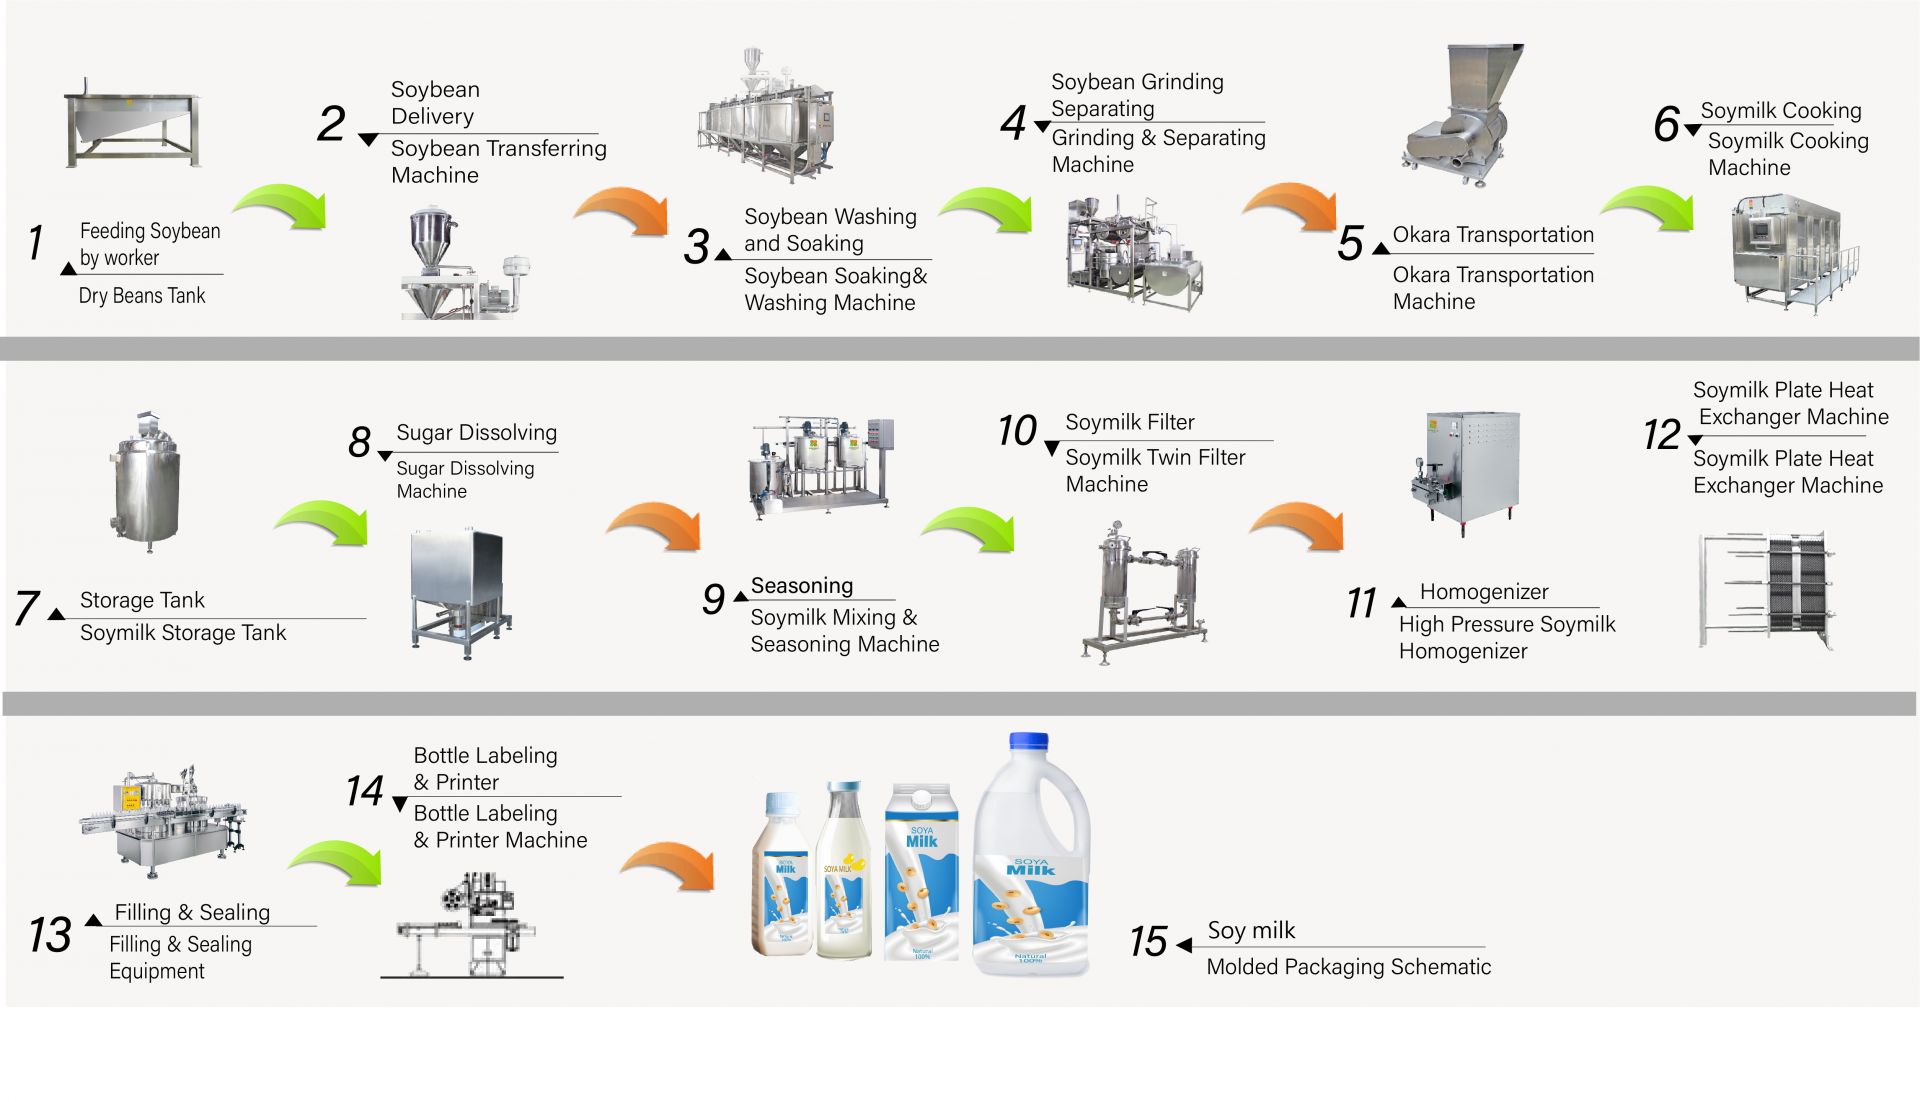 The process of making soy milk in the factory, How to make soy milk, Produce soy milk, soy milk flow chart, Soy milk making process, soy milk manufacturing process, soy milk process, soy milk process flow chart, Soy milk processing flow, Soy milk processing process, soy milk production, soy milk production flow chart, soy milk production process, soybean processing flow chart, Automatic soybean milk machine, Automatic soybean milk making machine, Easy Tofu Maker, Industrial production of soy milk, Industrial soy milk manufacturing, Industrial soymilk machine, Industrial tofu machine, plant milk machine, Plant milk production machine, production of soy milk, Soy Beverages Machine, Soy Beverages Production Line, Soy Drink Machine, soy milk and tofu making commercial soy milk machine, soy milk and tofu making machine, Soy milk beverage machinery and equipment, Soy Milk Cooking Machine, soy milk factory, soy milk machine, soy milk machine commercial, Soy milk machine made in Taiwan, Soy milk machinery, Soy milk machinery and equipment, soy milk Maker, Soy milk making machine, soy milk manufacturers, Soy milk production, soy milk production equipment, Soy milk production factory, Soy Milk Production Line, soya milk making machine price, soybean processing machine, soymilk factory, soymilk machine